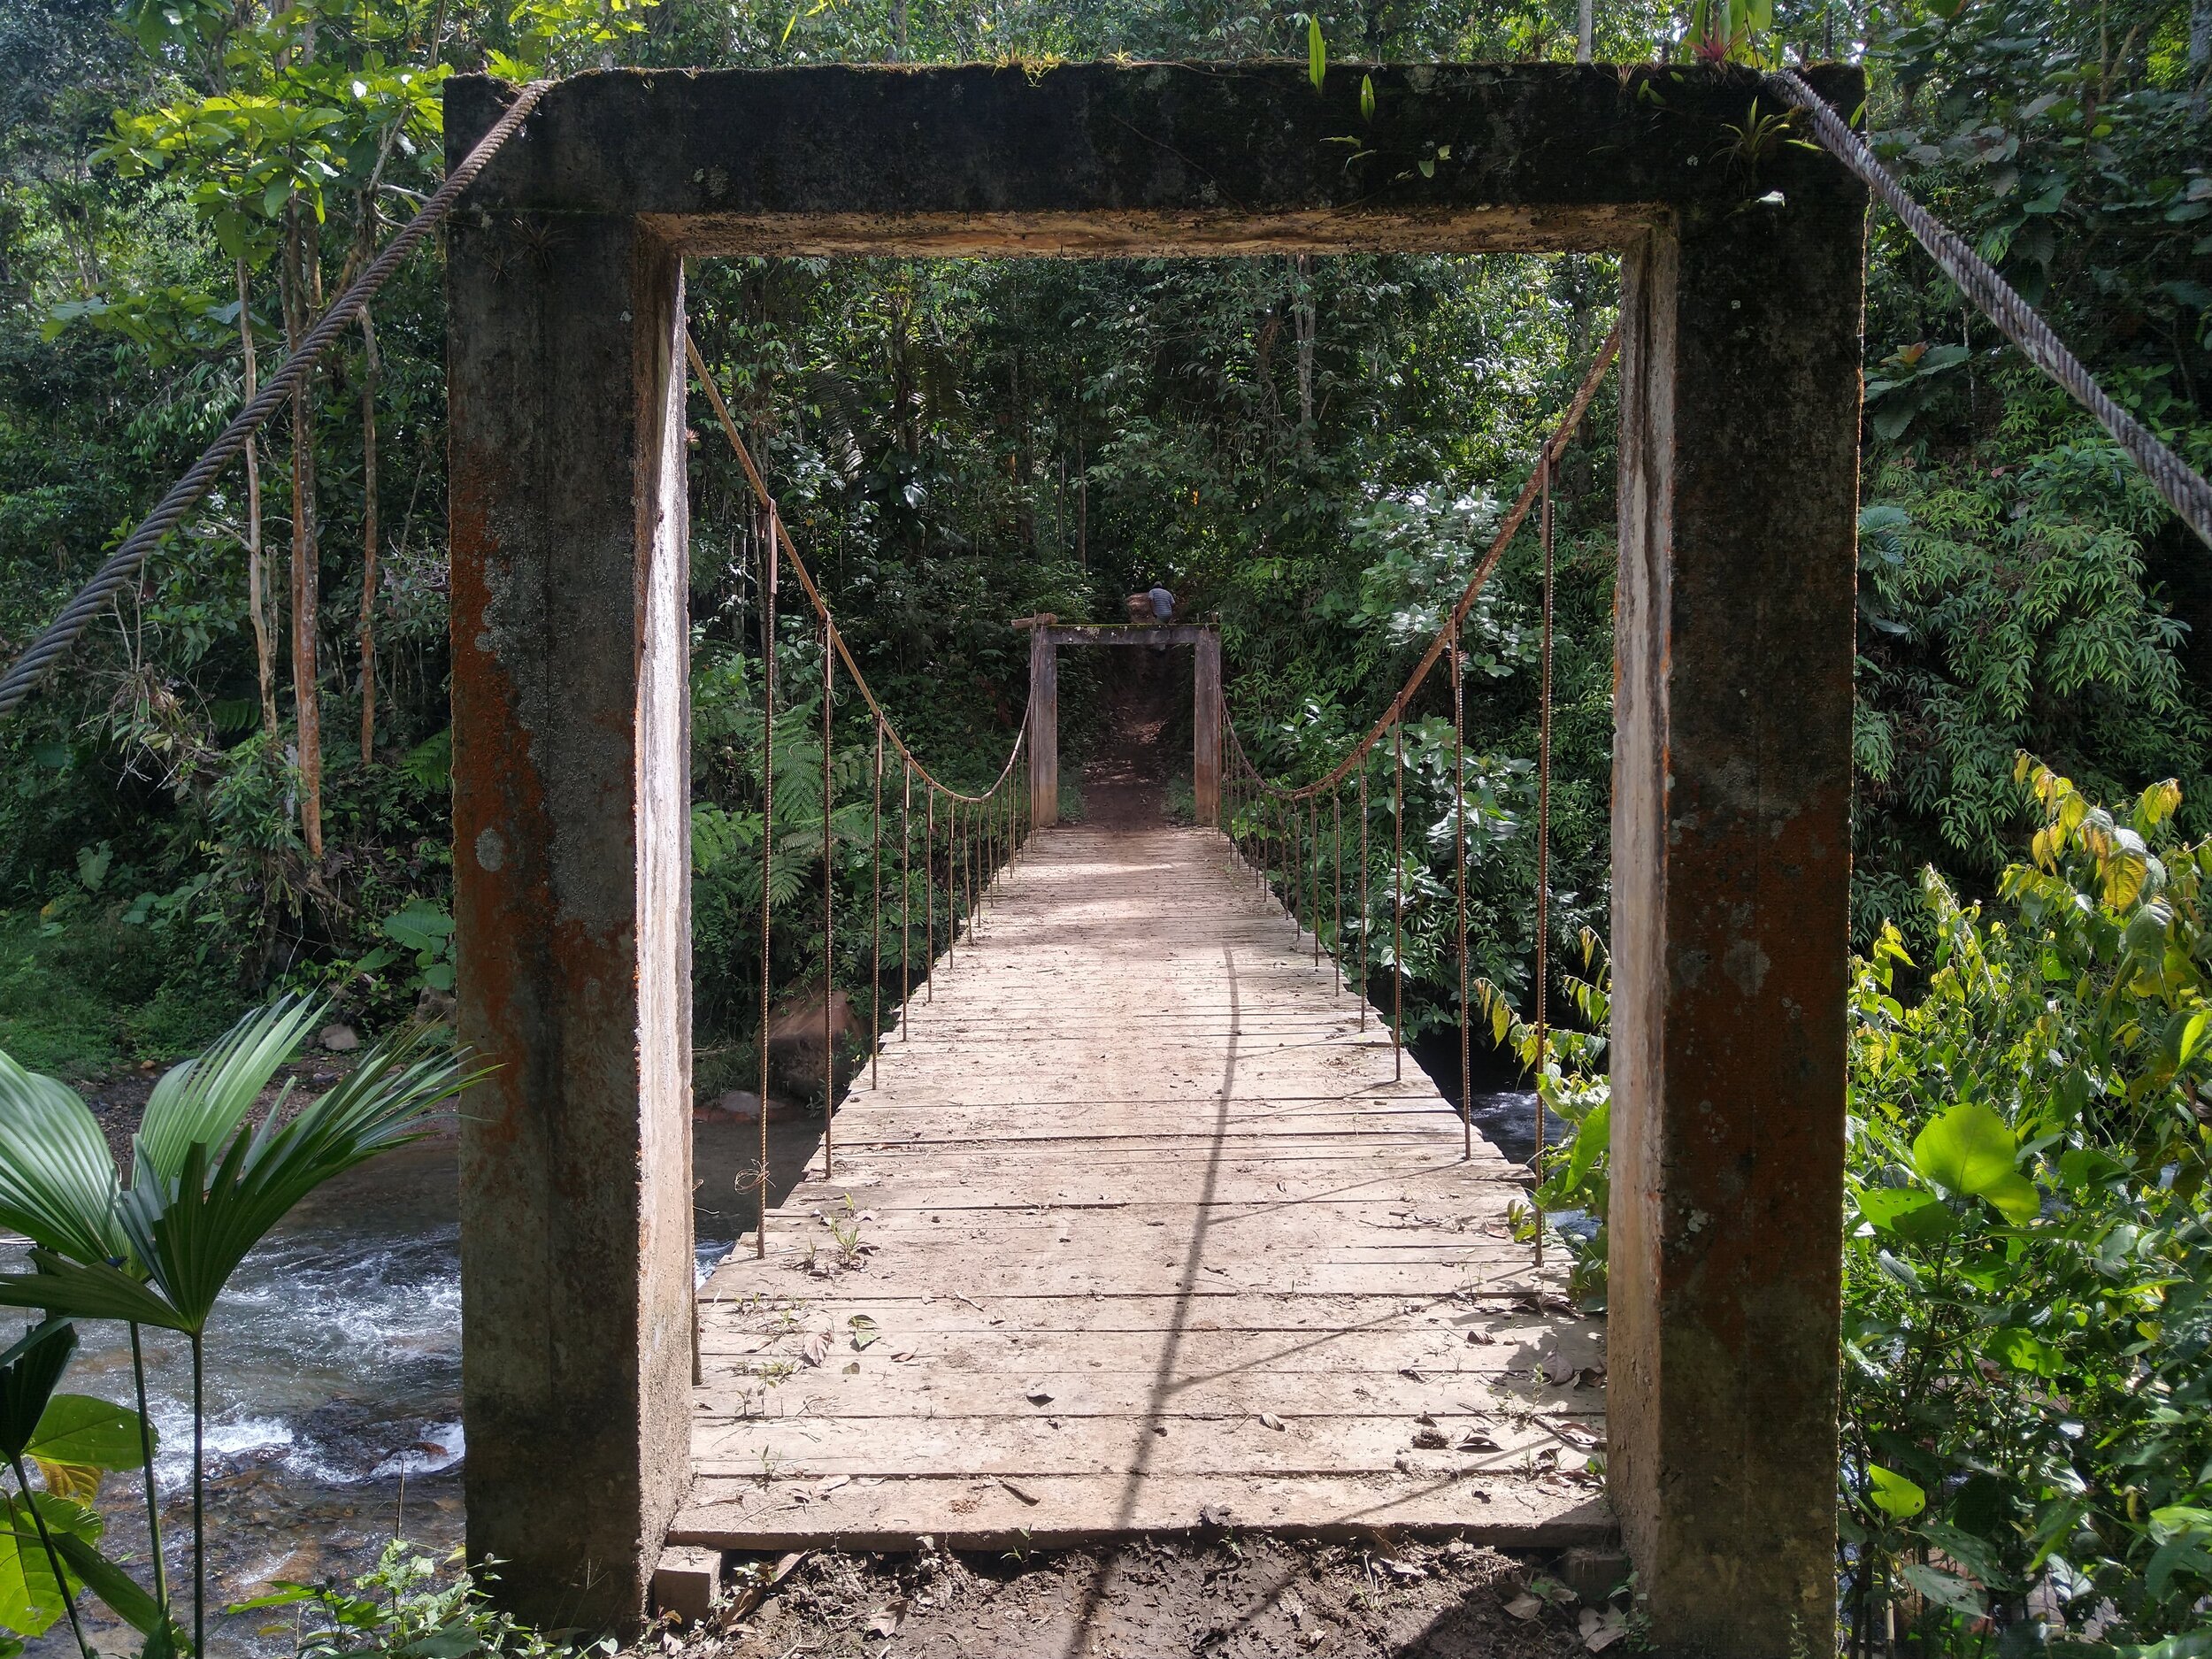 Footbridge over the Chontal River